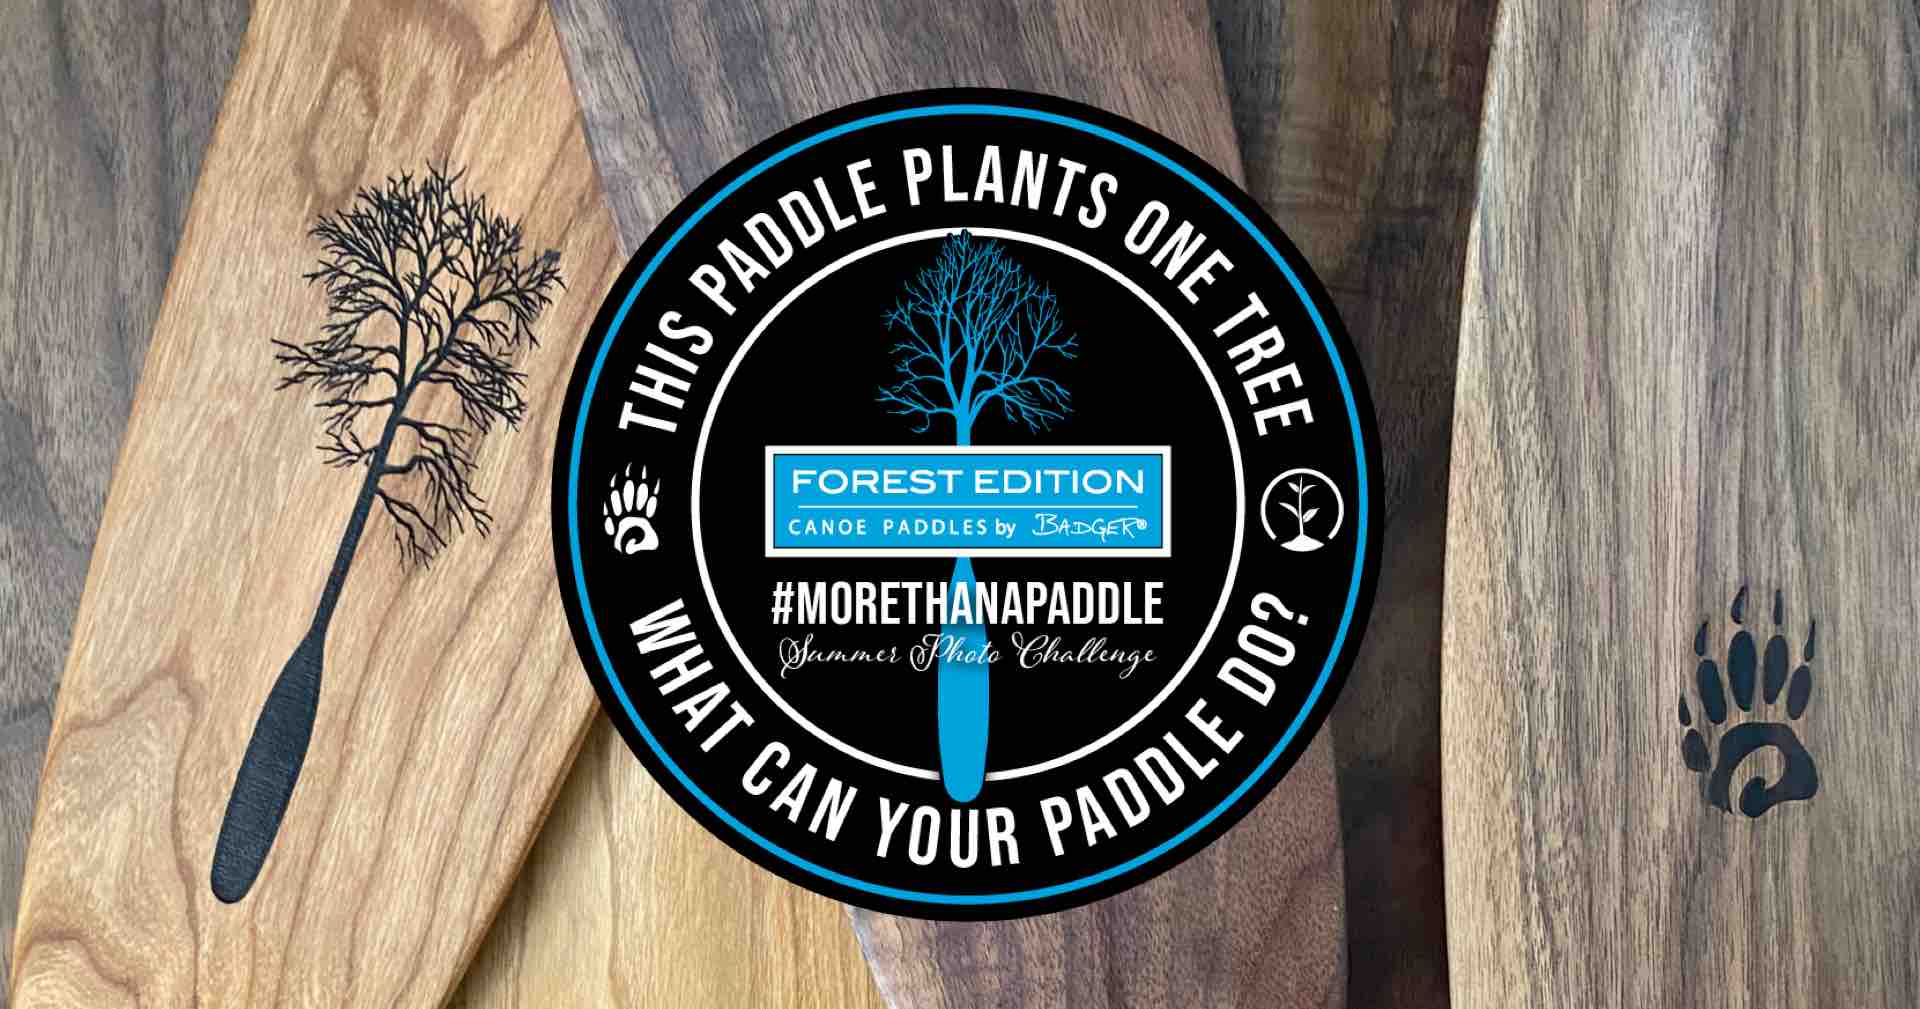 This paddle plants one tree. What can your paddle do? Forest Edition Canoe Paddles by Badger #morethanapaddle Summer Photo Challenge